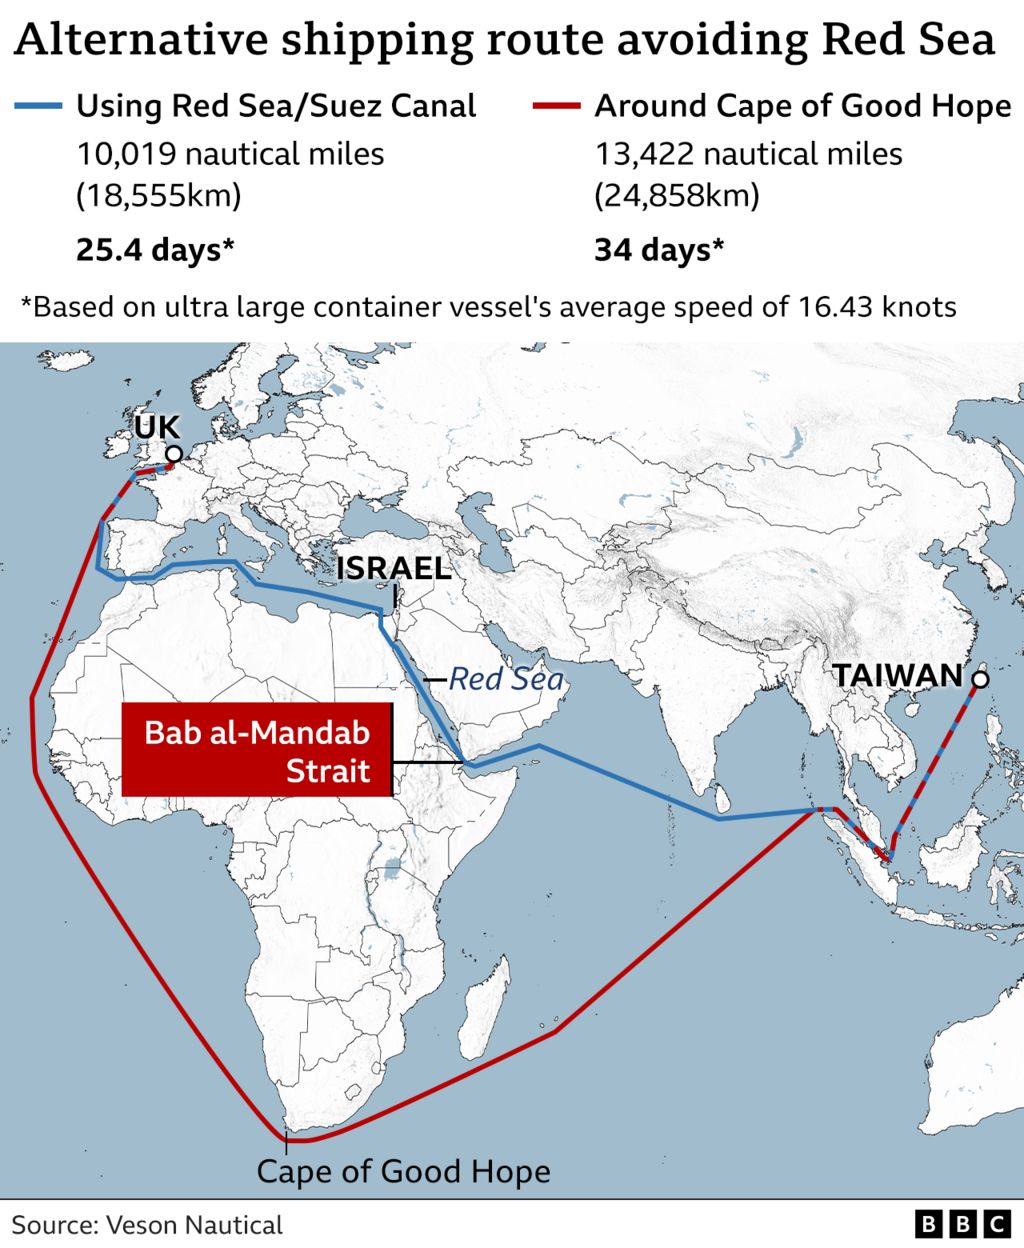 BBC map shows the consequences of ships diverting away from the Red Sea - incurring a much longer journey around the Cape of Good Hope in southern Africa